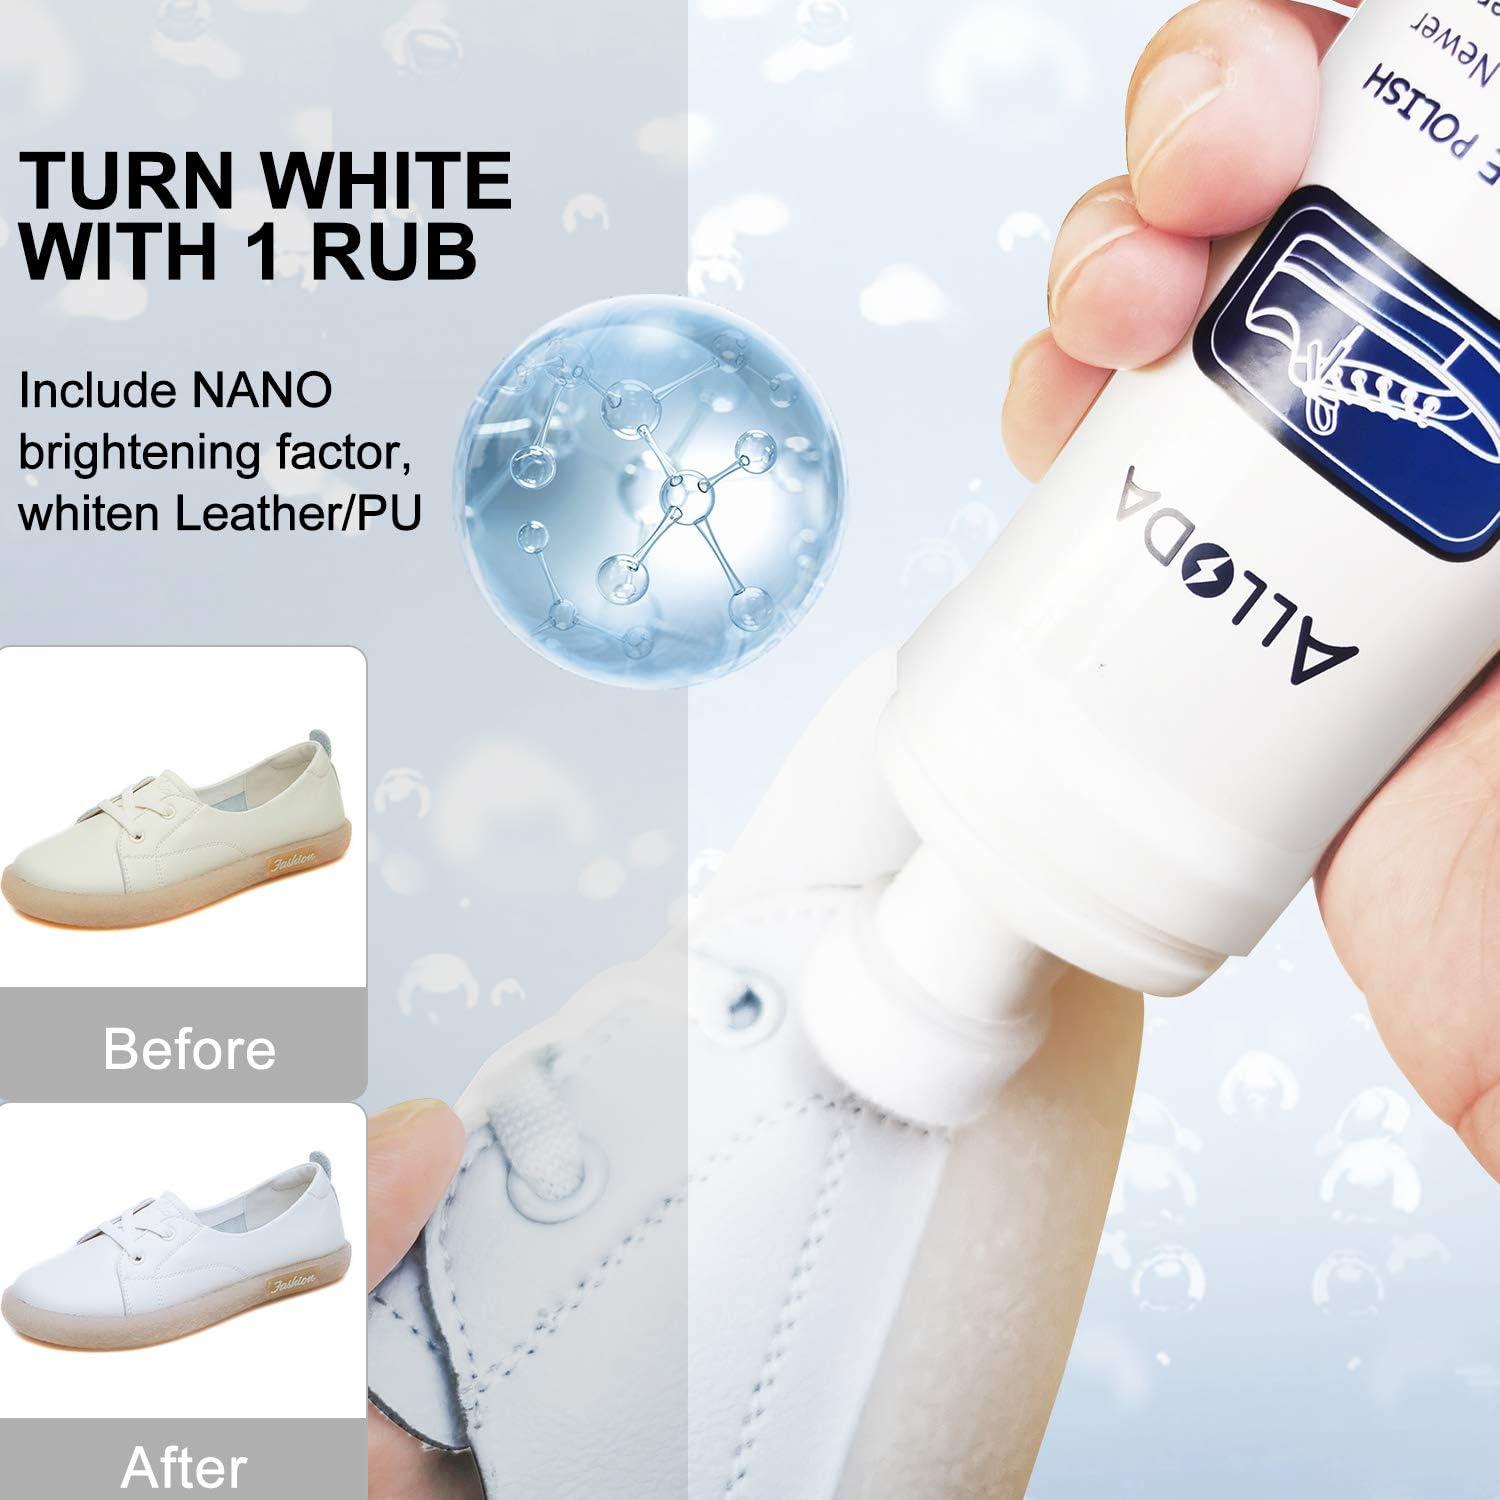 x All-Purpose Sneaker Cleaning Brush, 100% Boar Bristles - Soft Bristles for Delicate Shoe Materials!